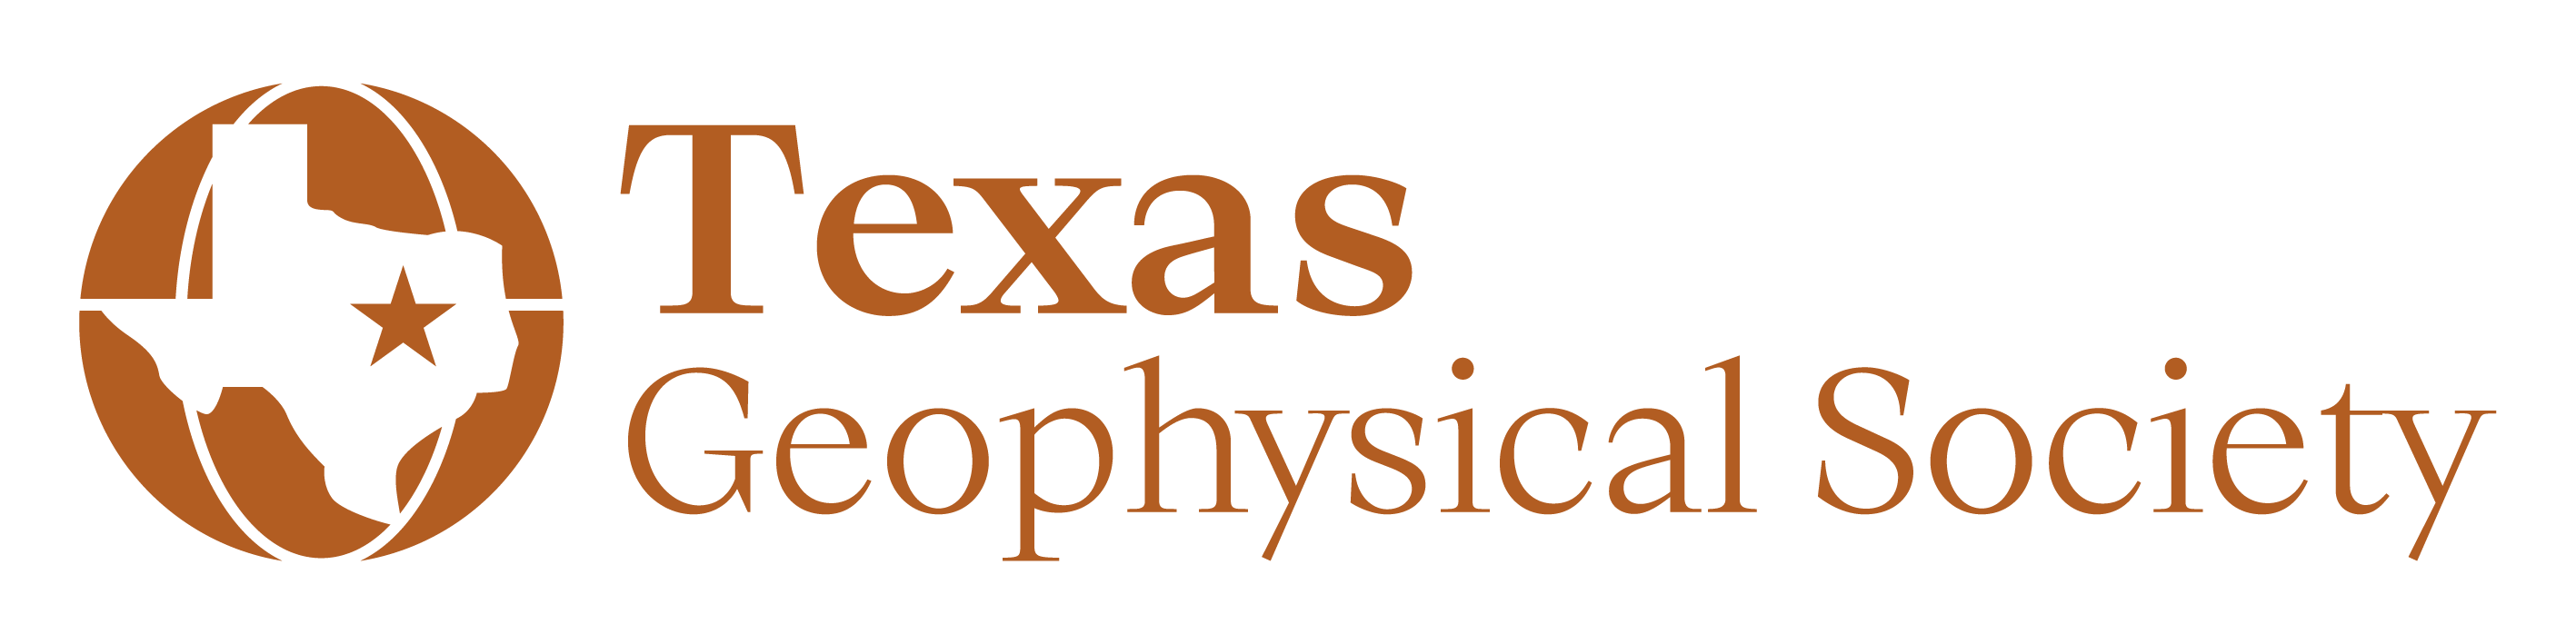 Cropped Texas Geophysical Society 04.png